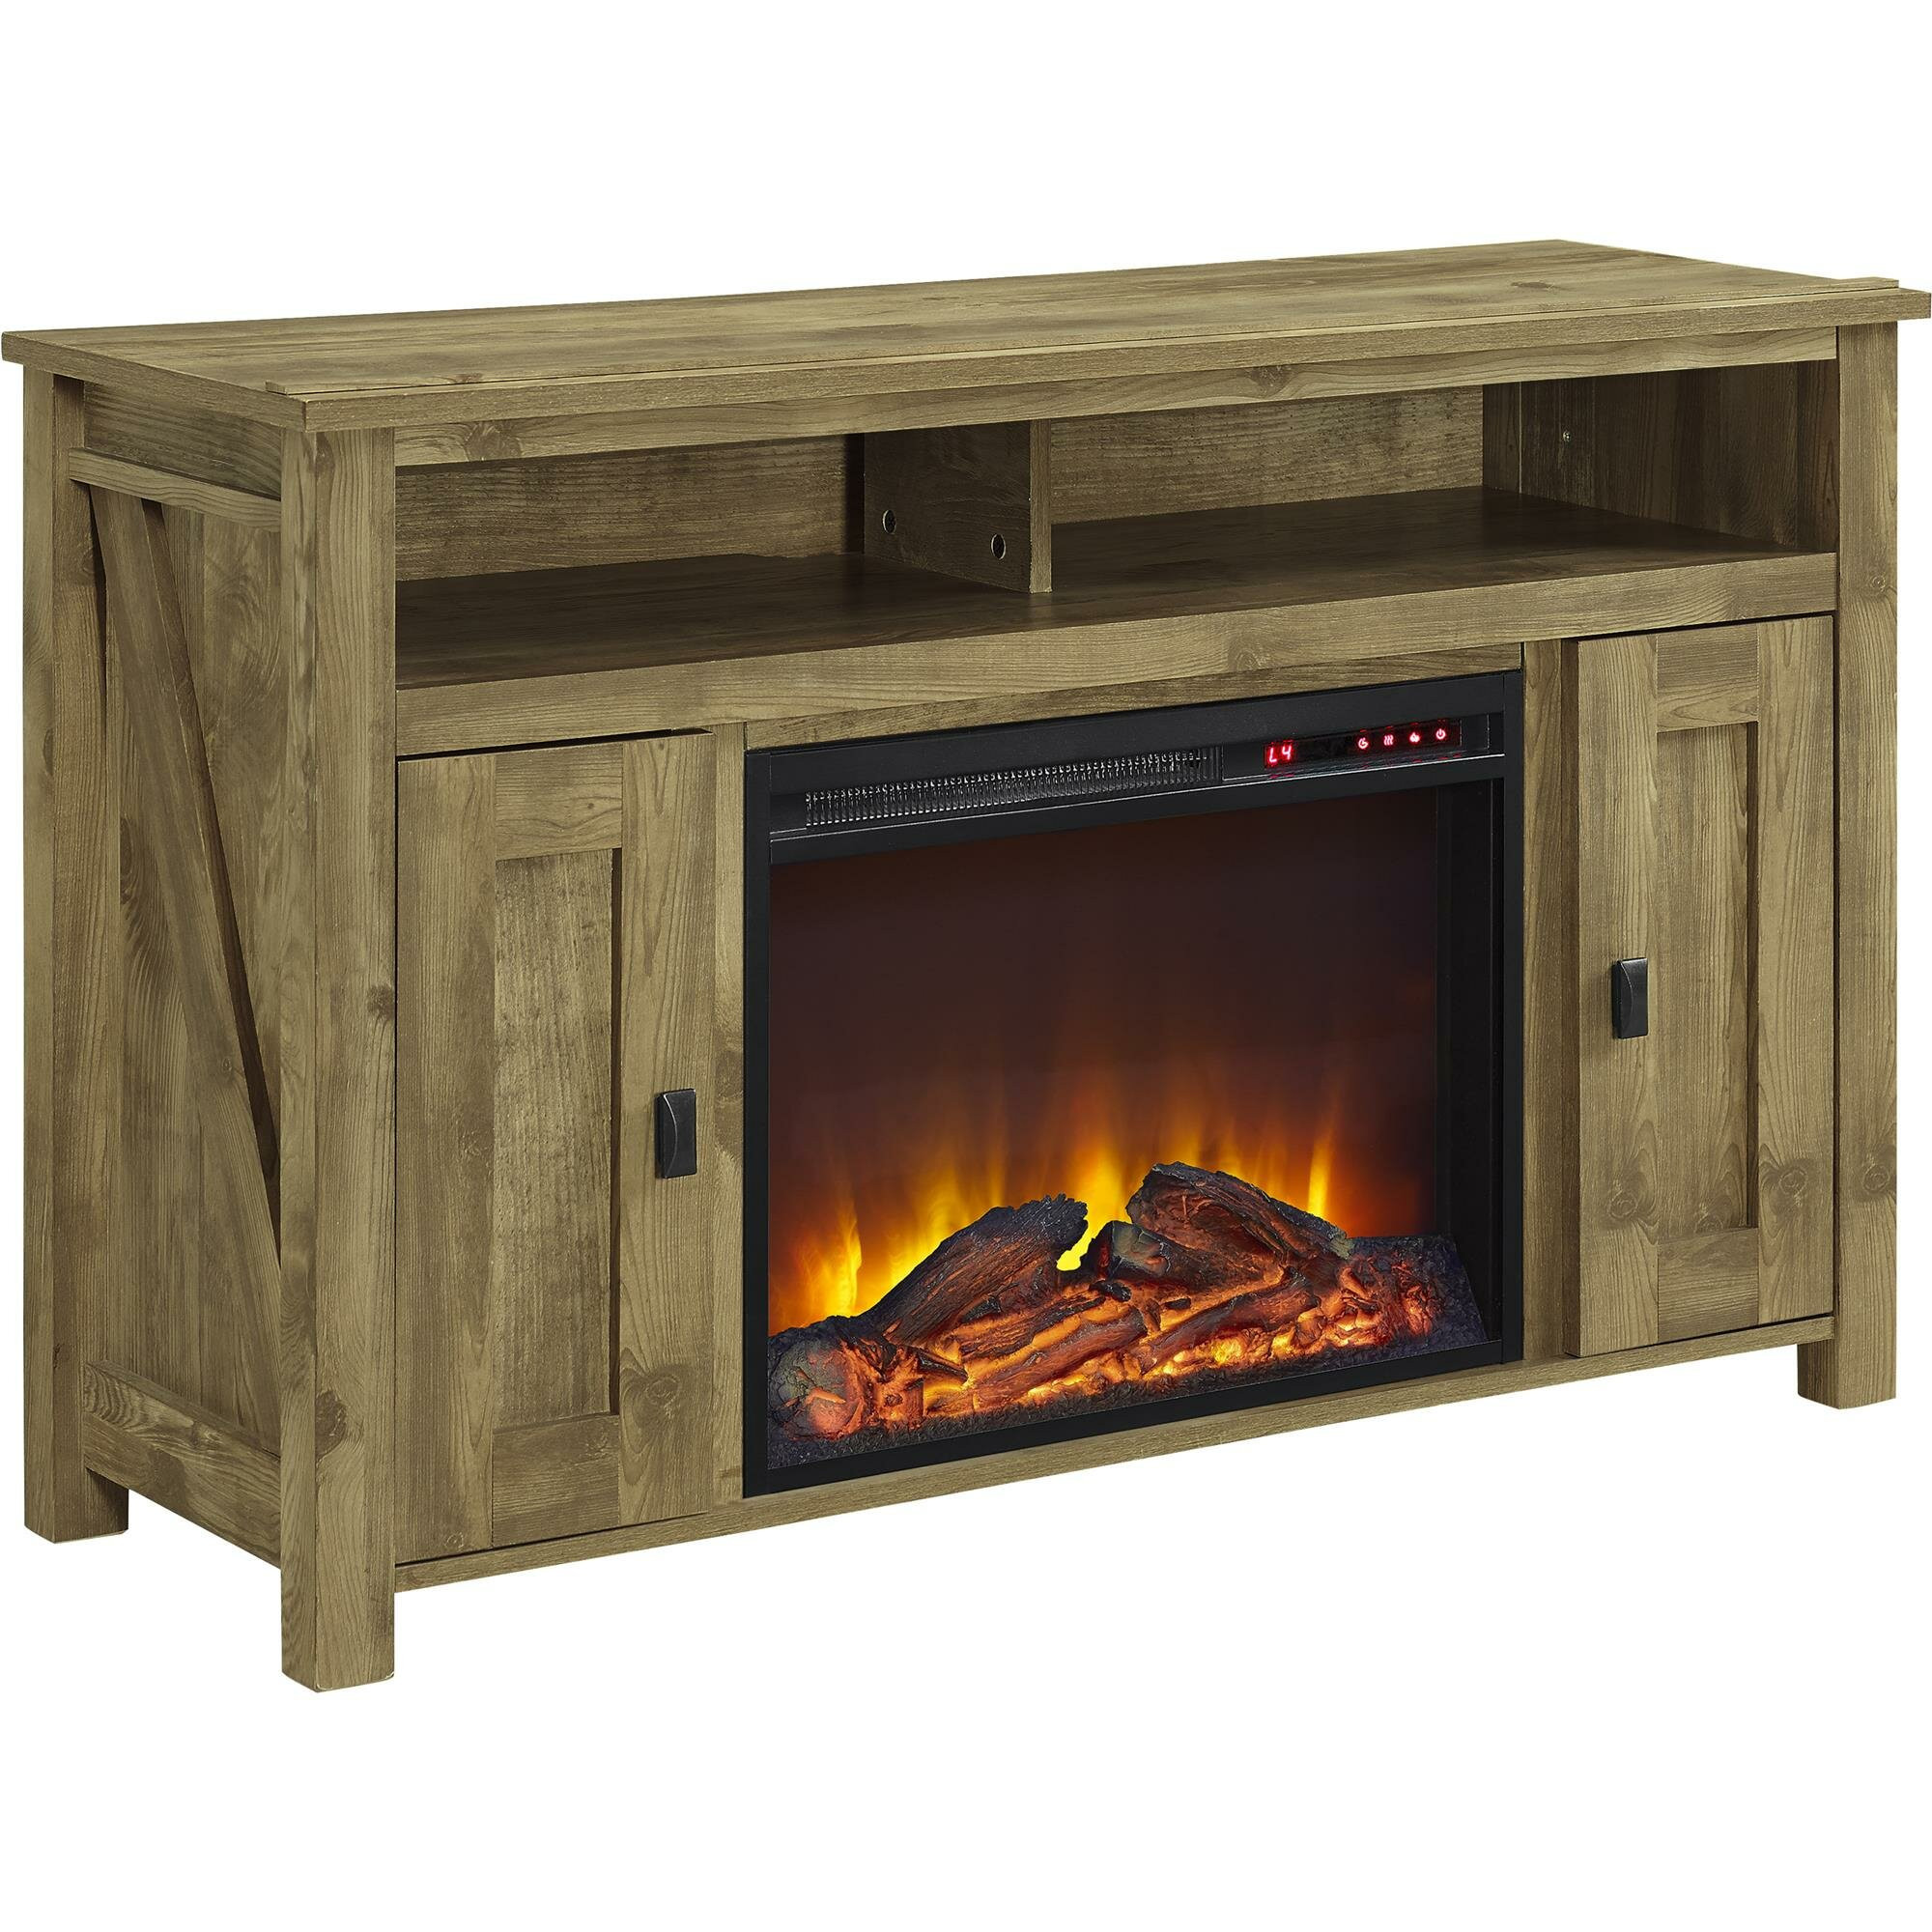 Rustic Electric Fireplace Tv Stand
 August Grove Gilby TV Stand with Electric Fireplace